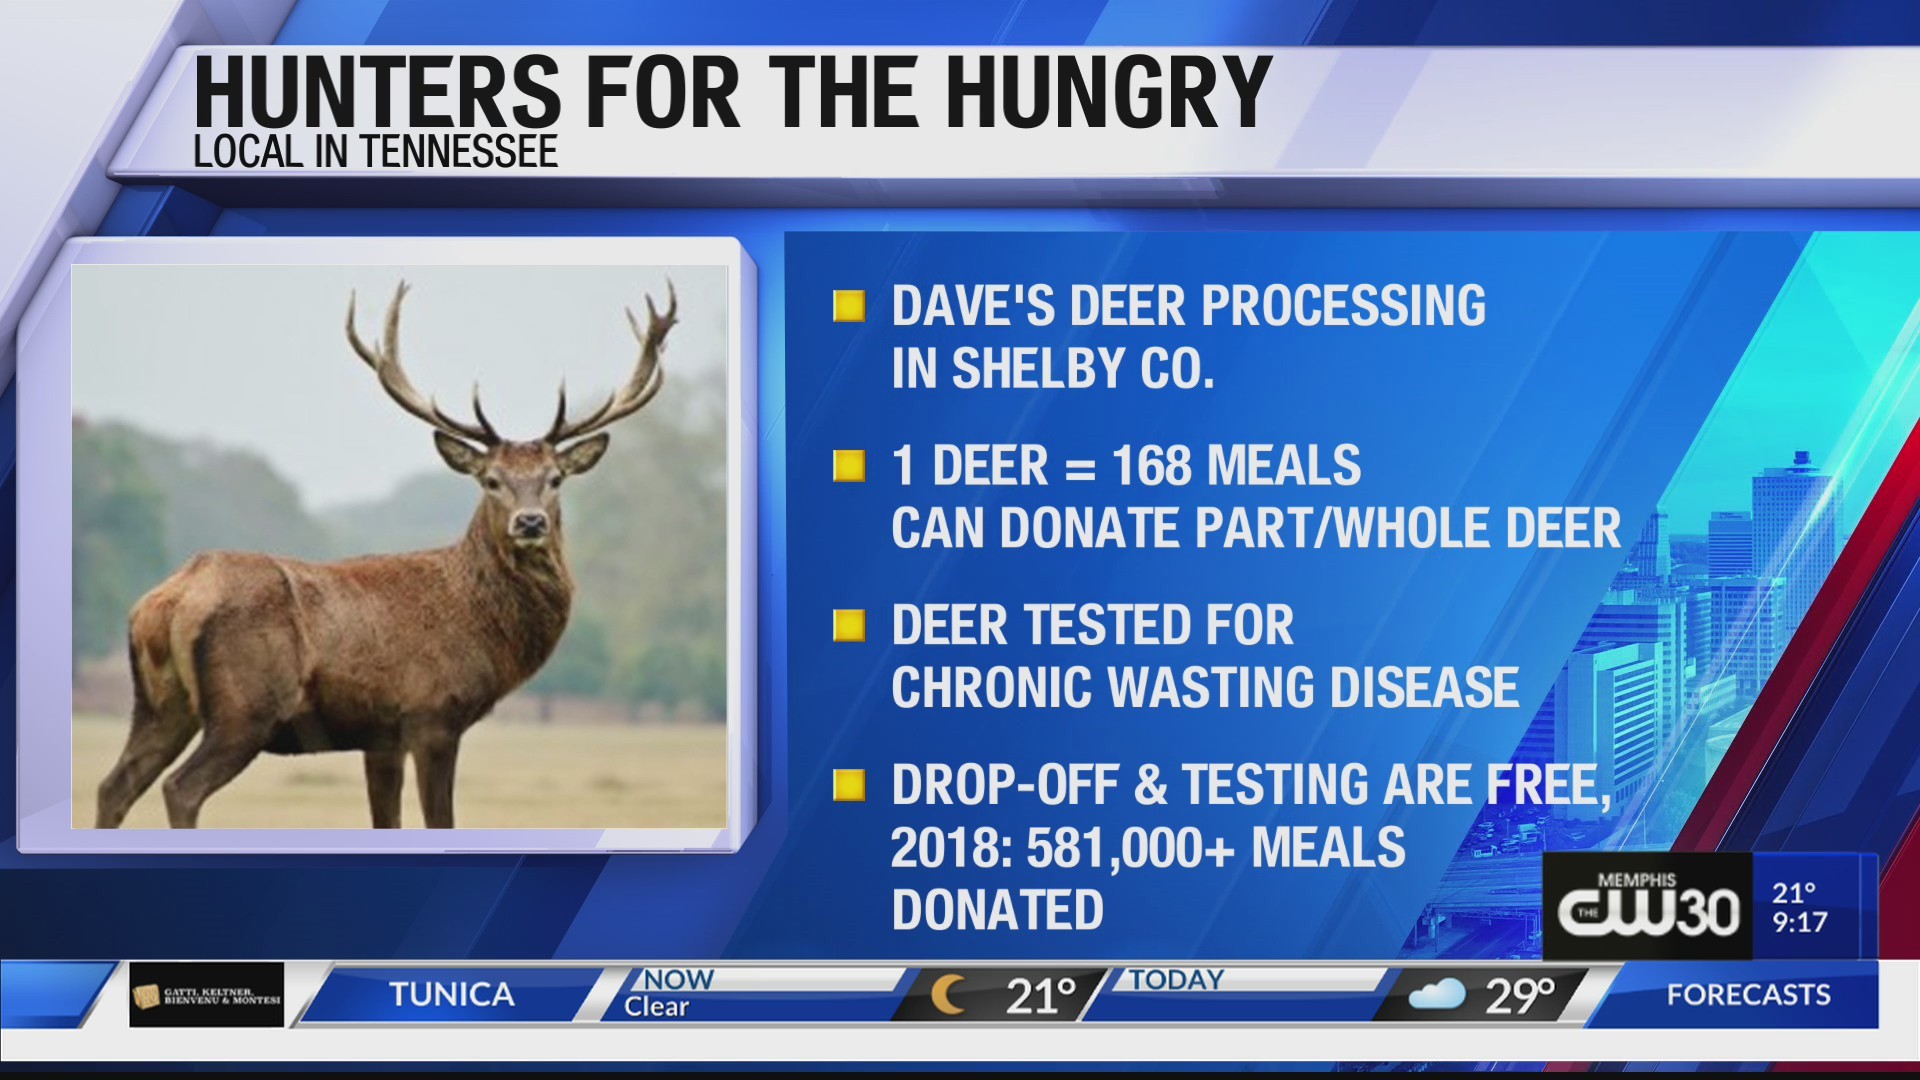 TN Hunters for the Hungry program is accepting donations to help feed the need